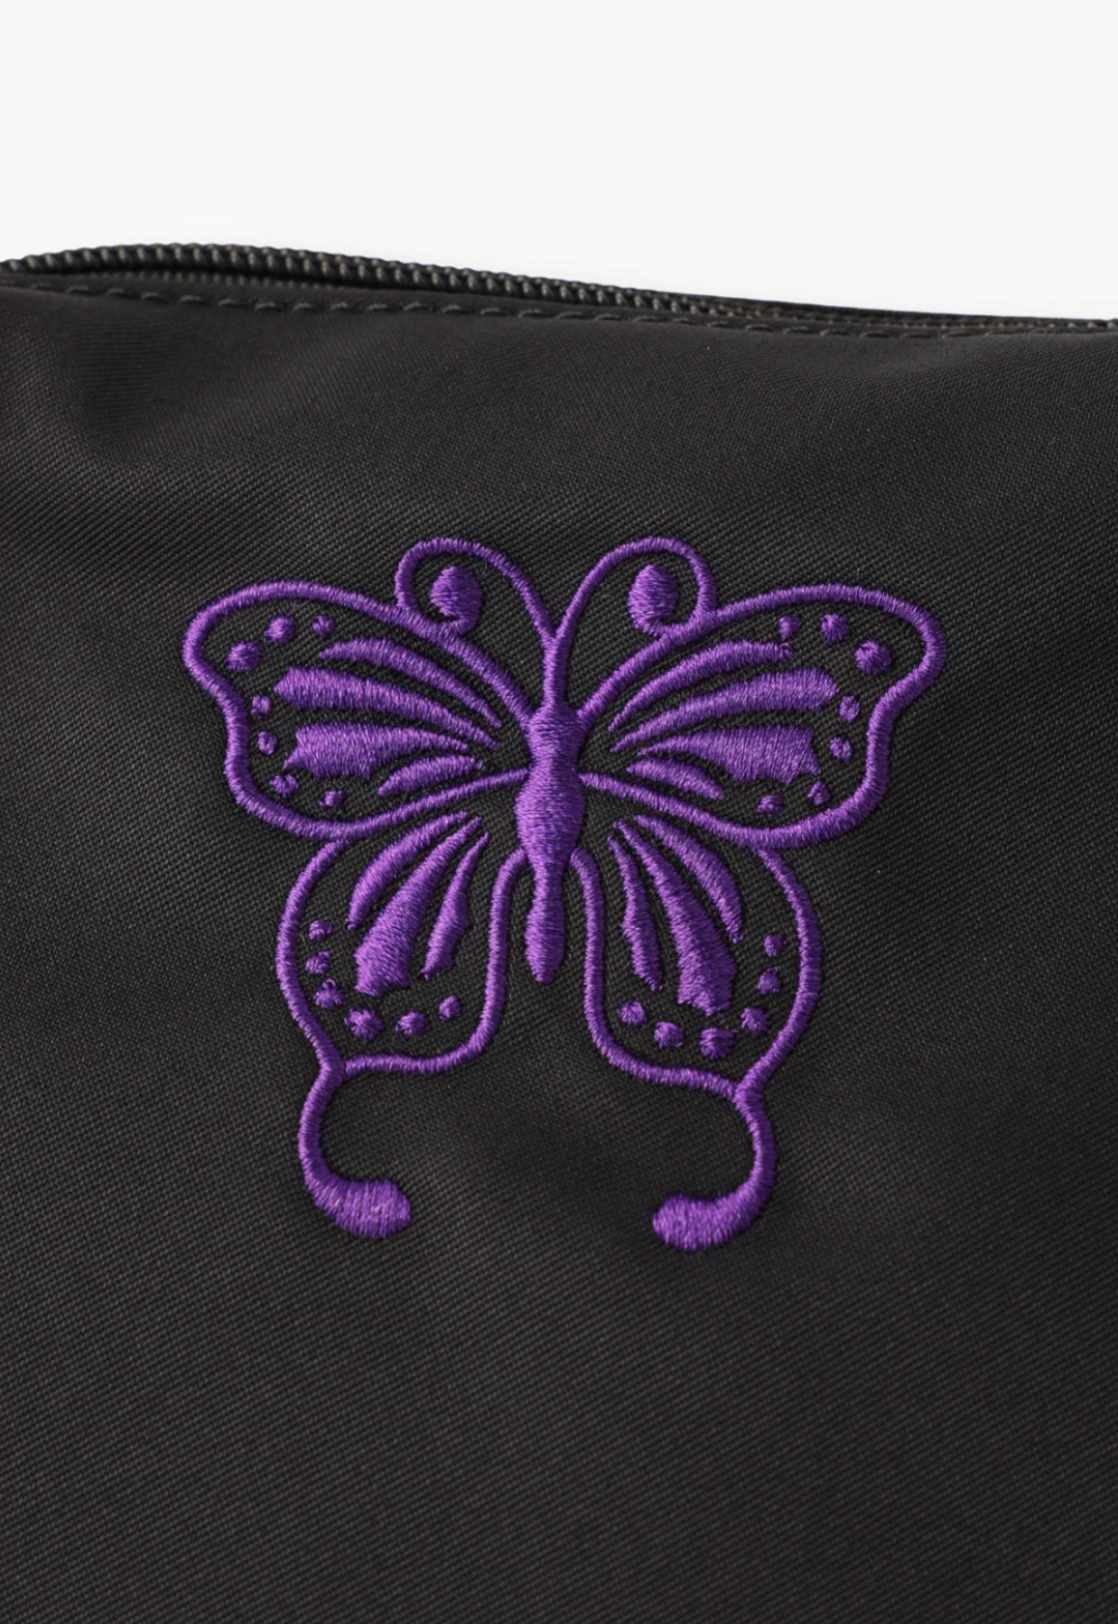 Detail of  Anna Sui Butterfly embroidered in a purple color at the top of the bag